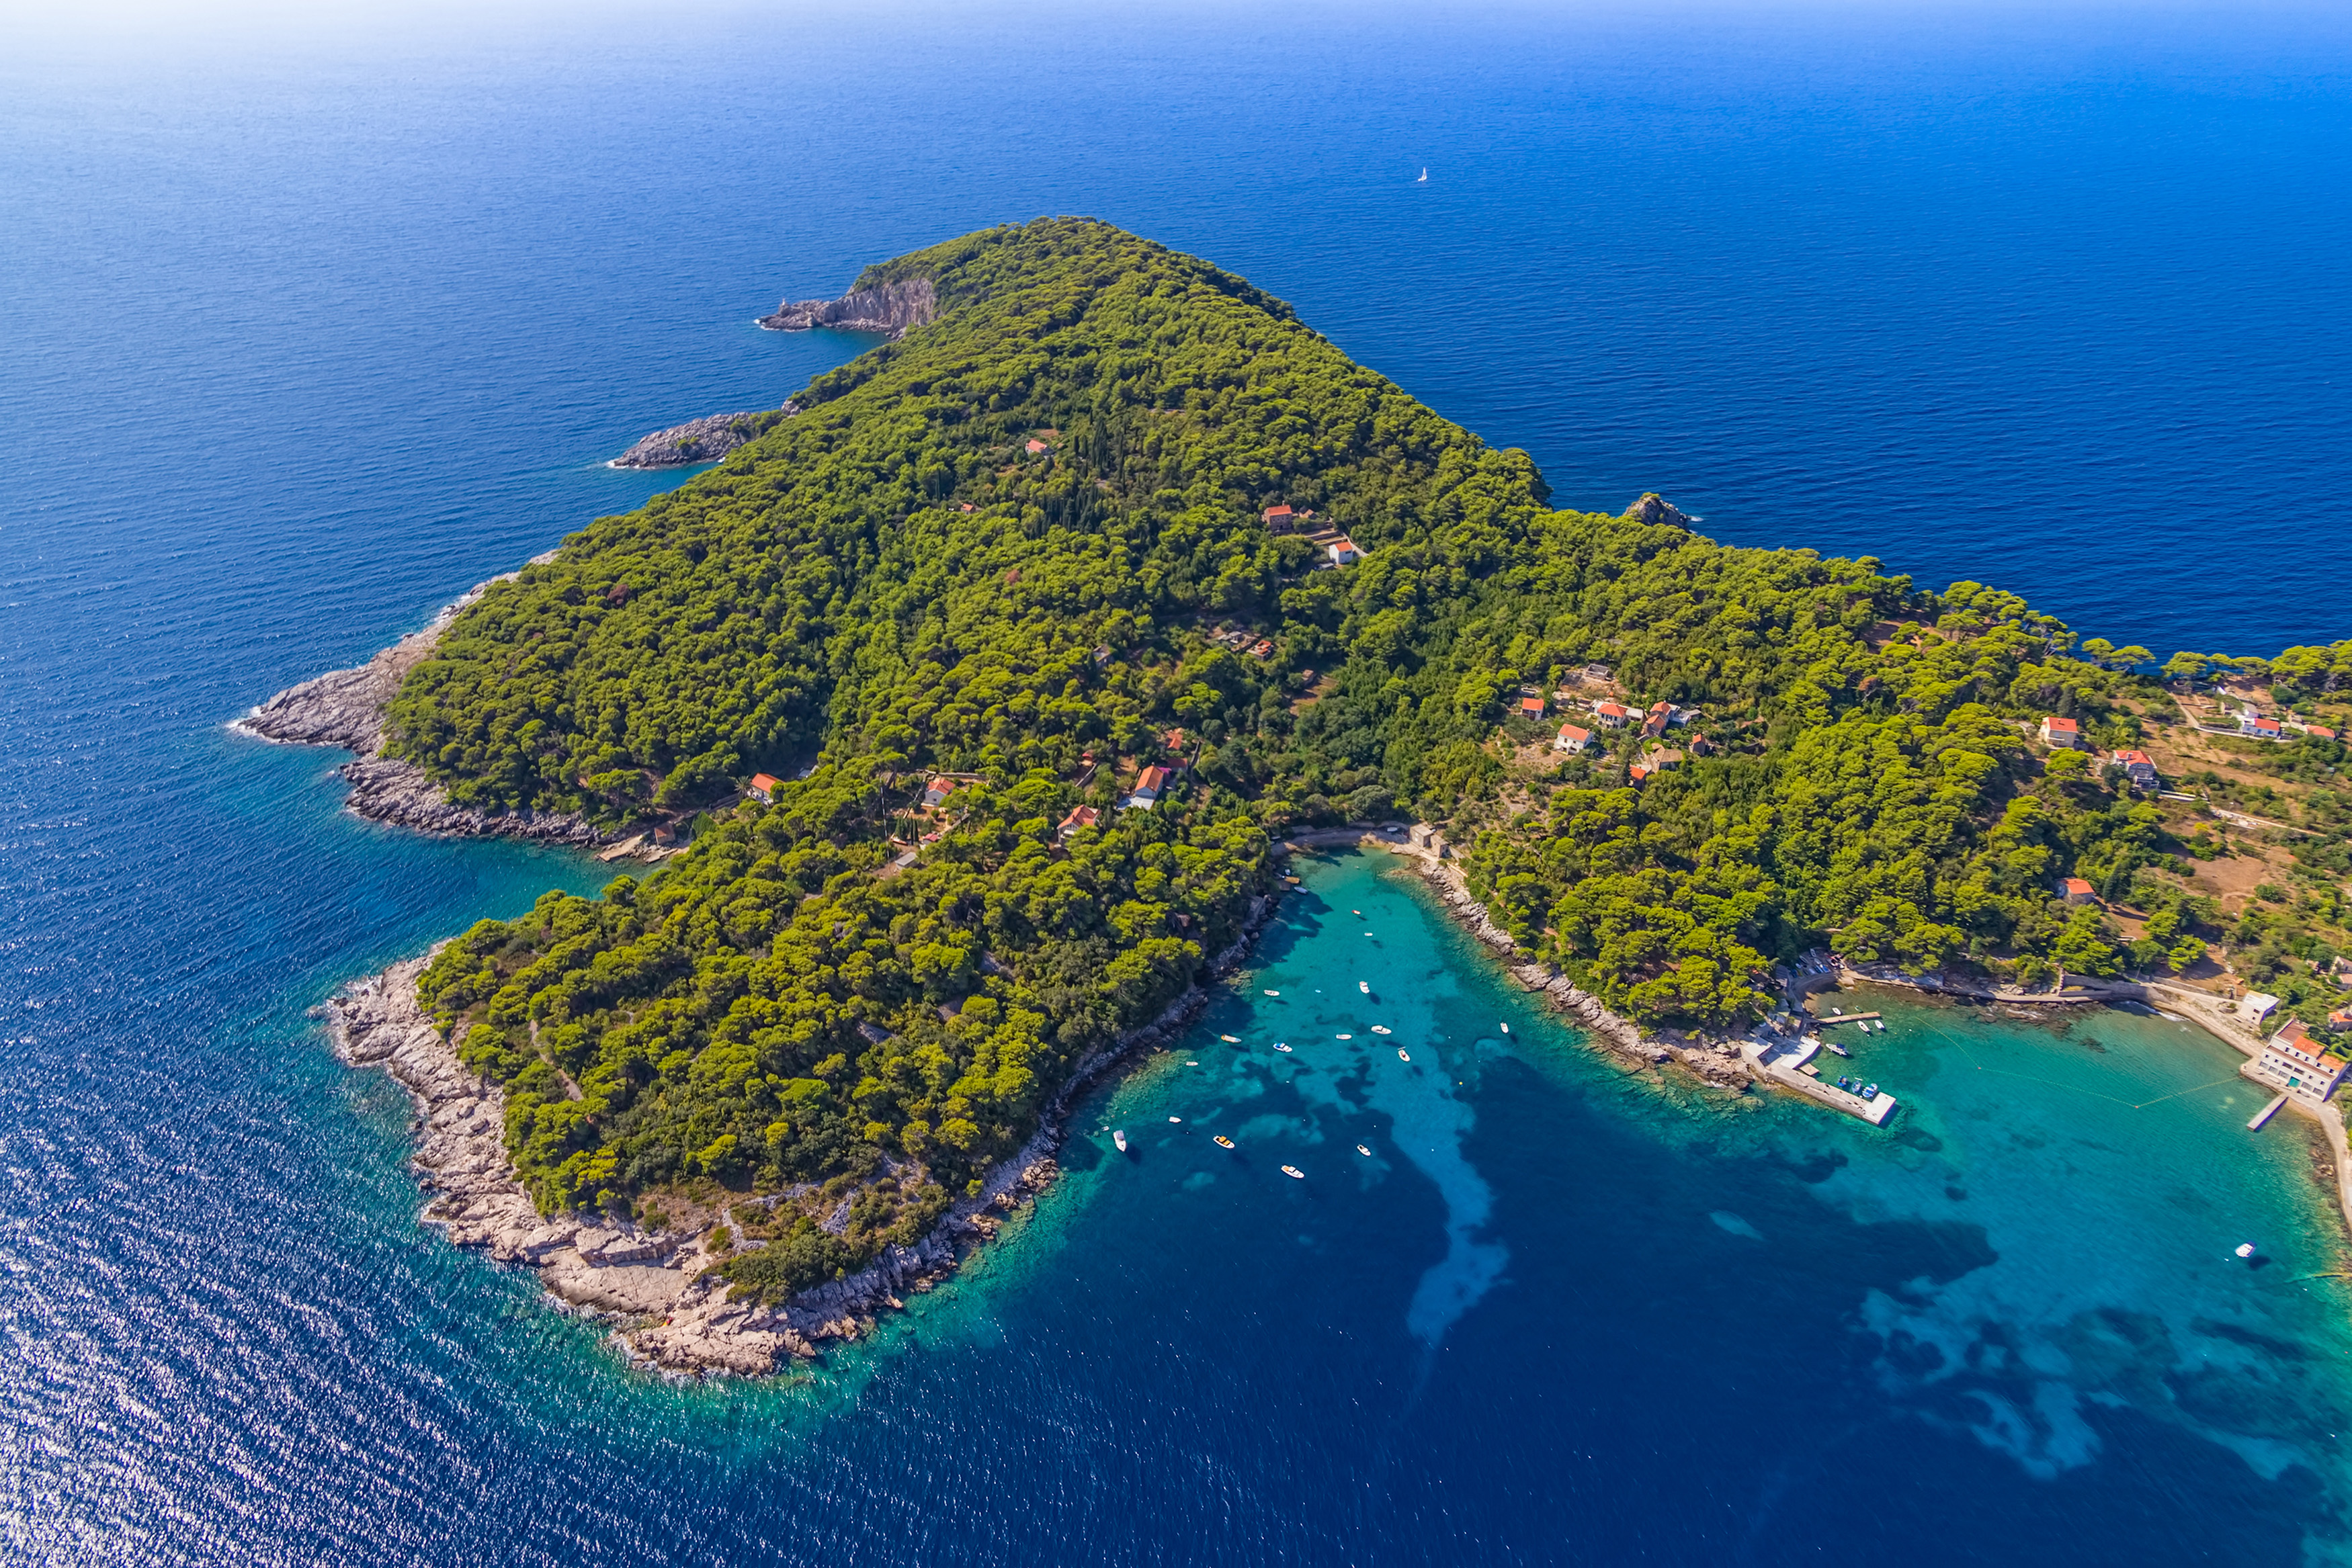 Private Elaphite Islands by motor yacht from Dubrovnik